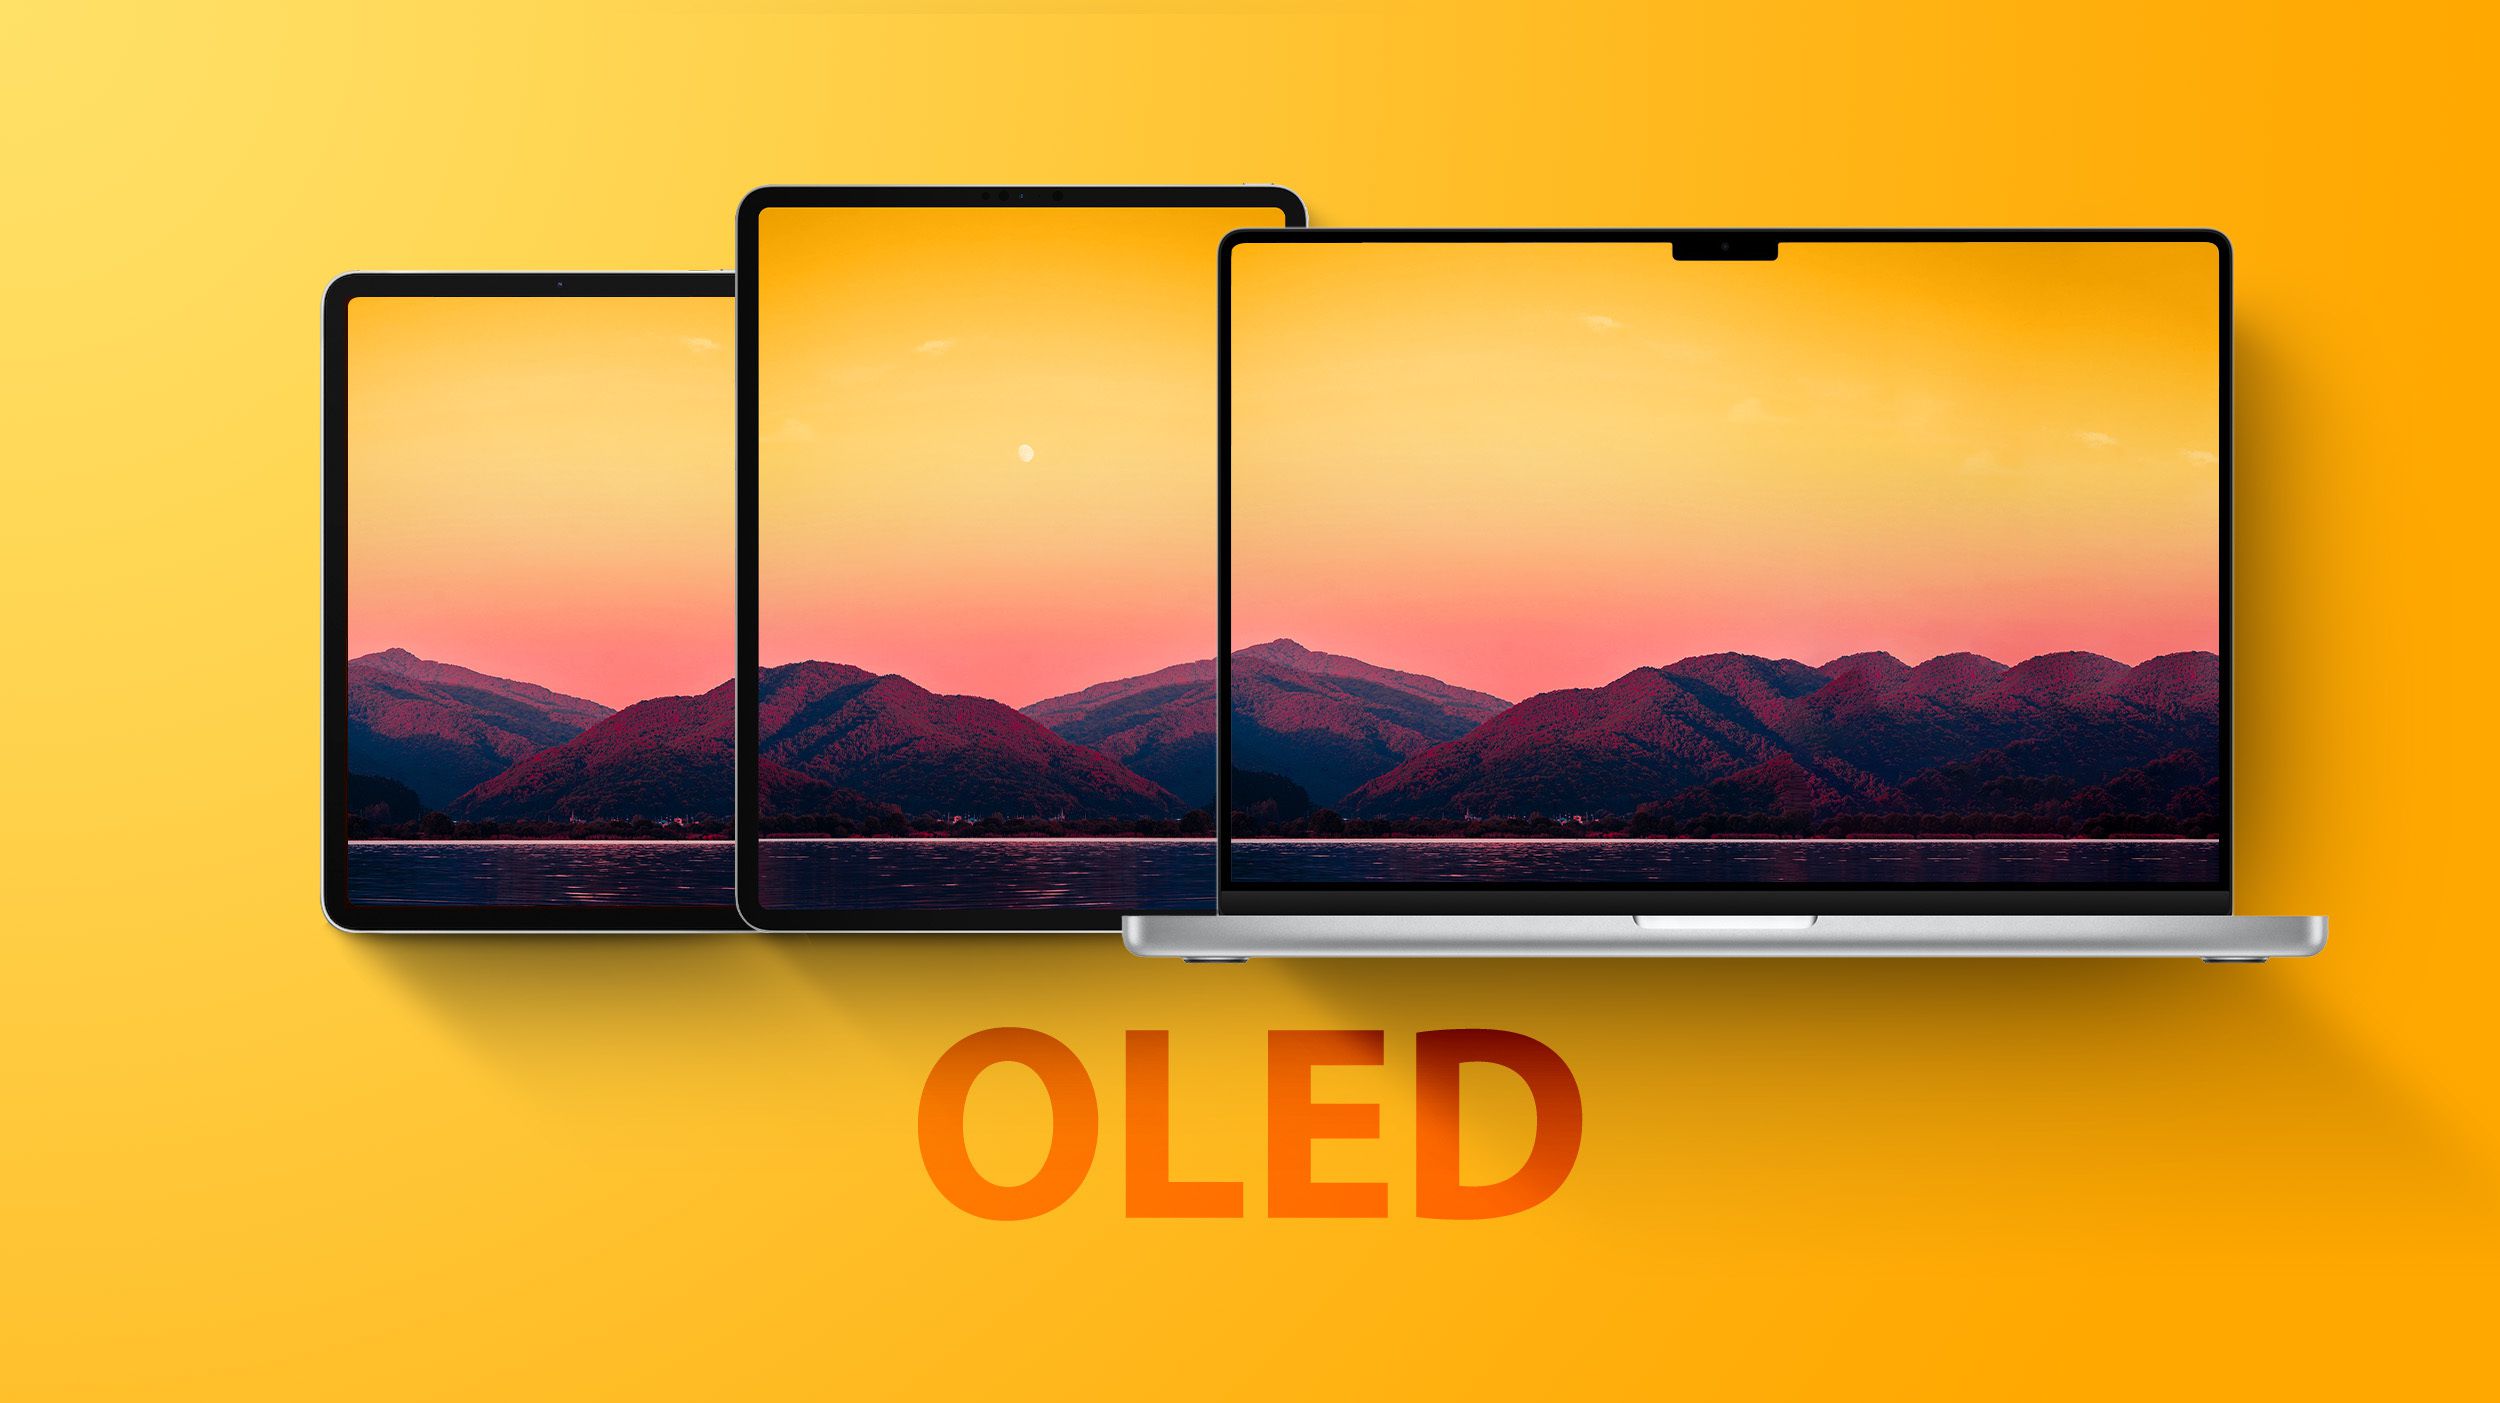 Apple Mini-LED Display Supplier Says Demand Shrinking As Rumors Suggest Transition to OLED in Coming Years